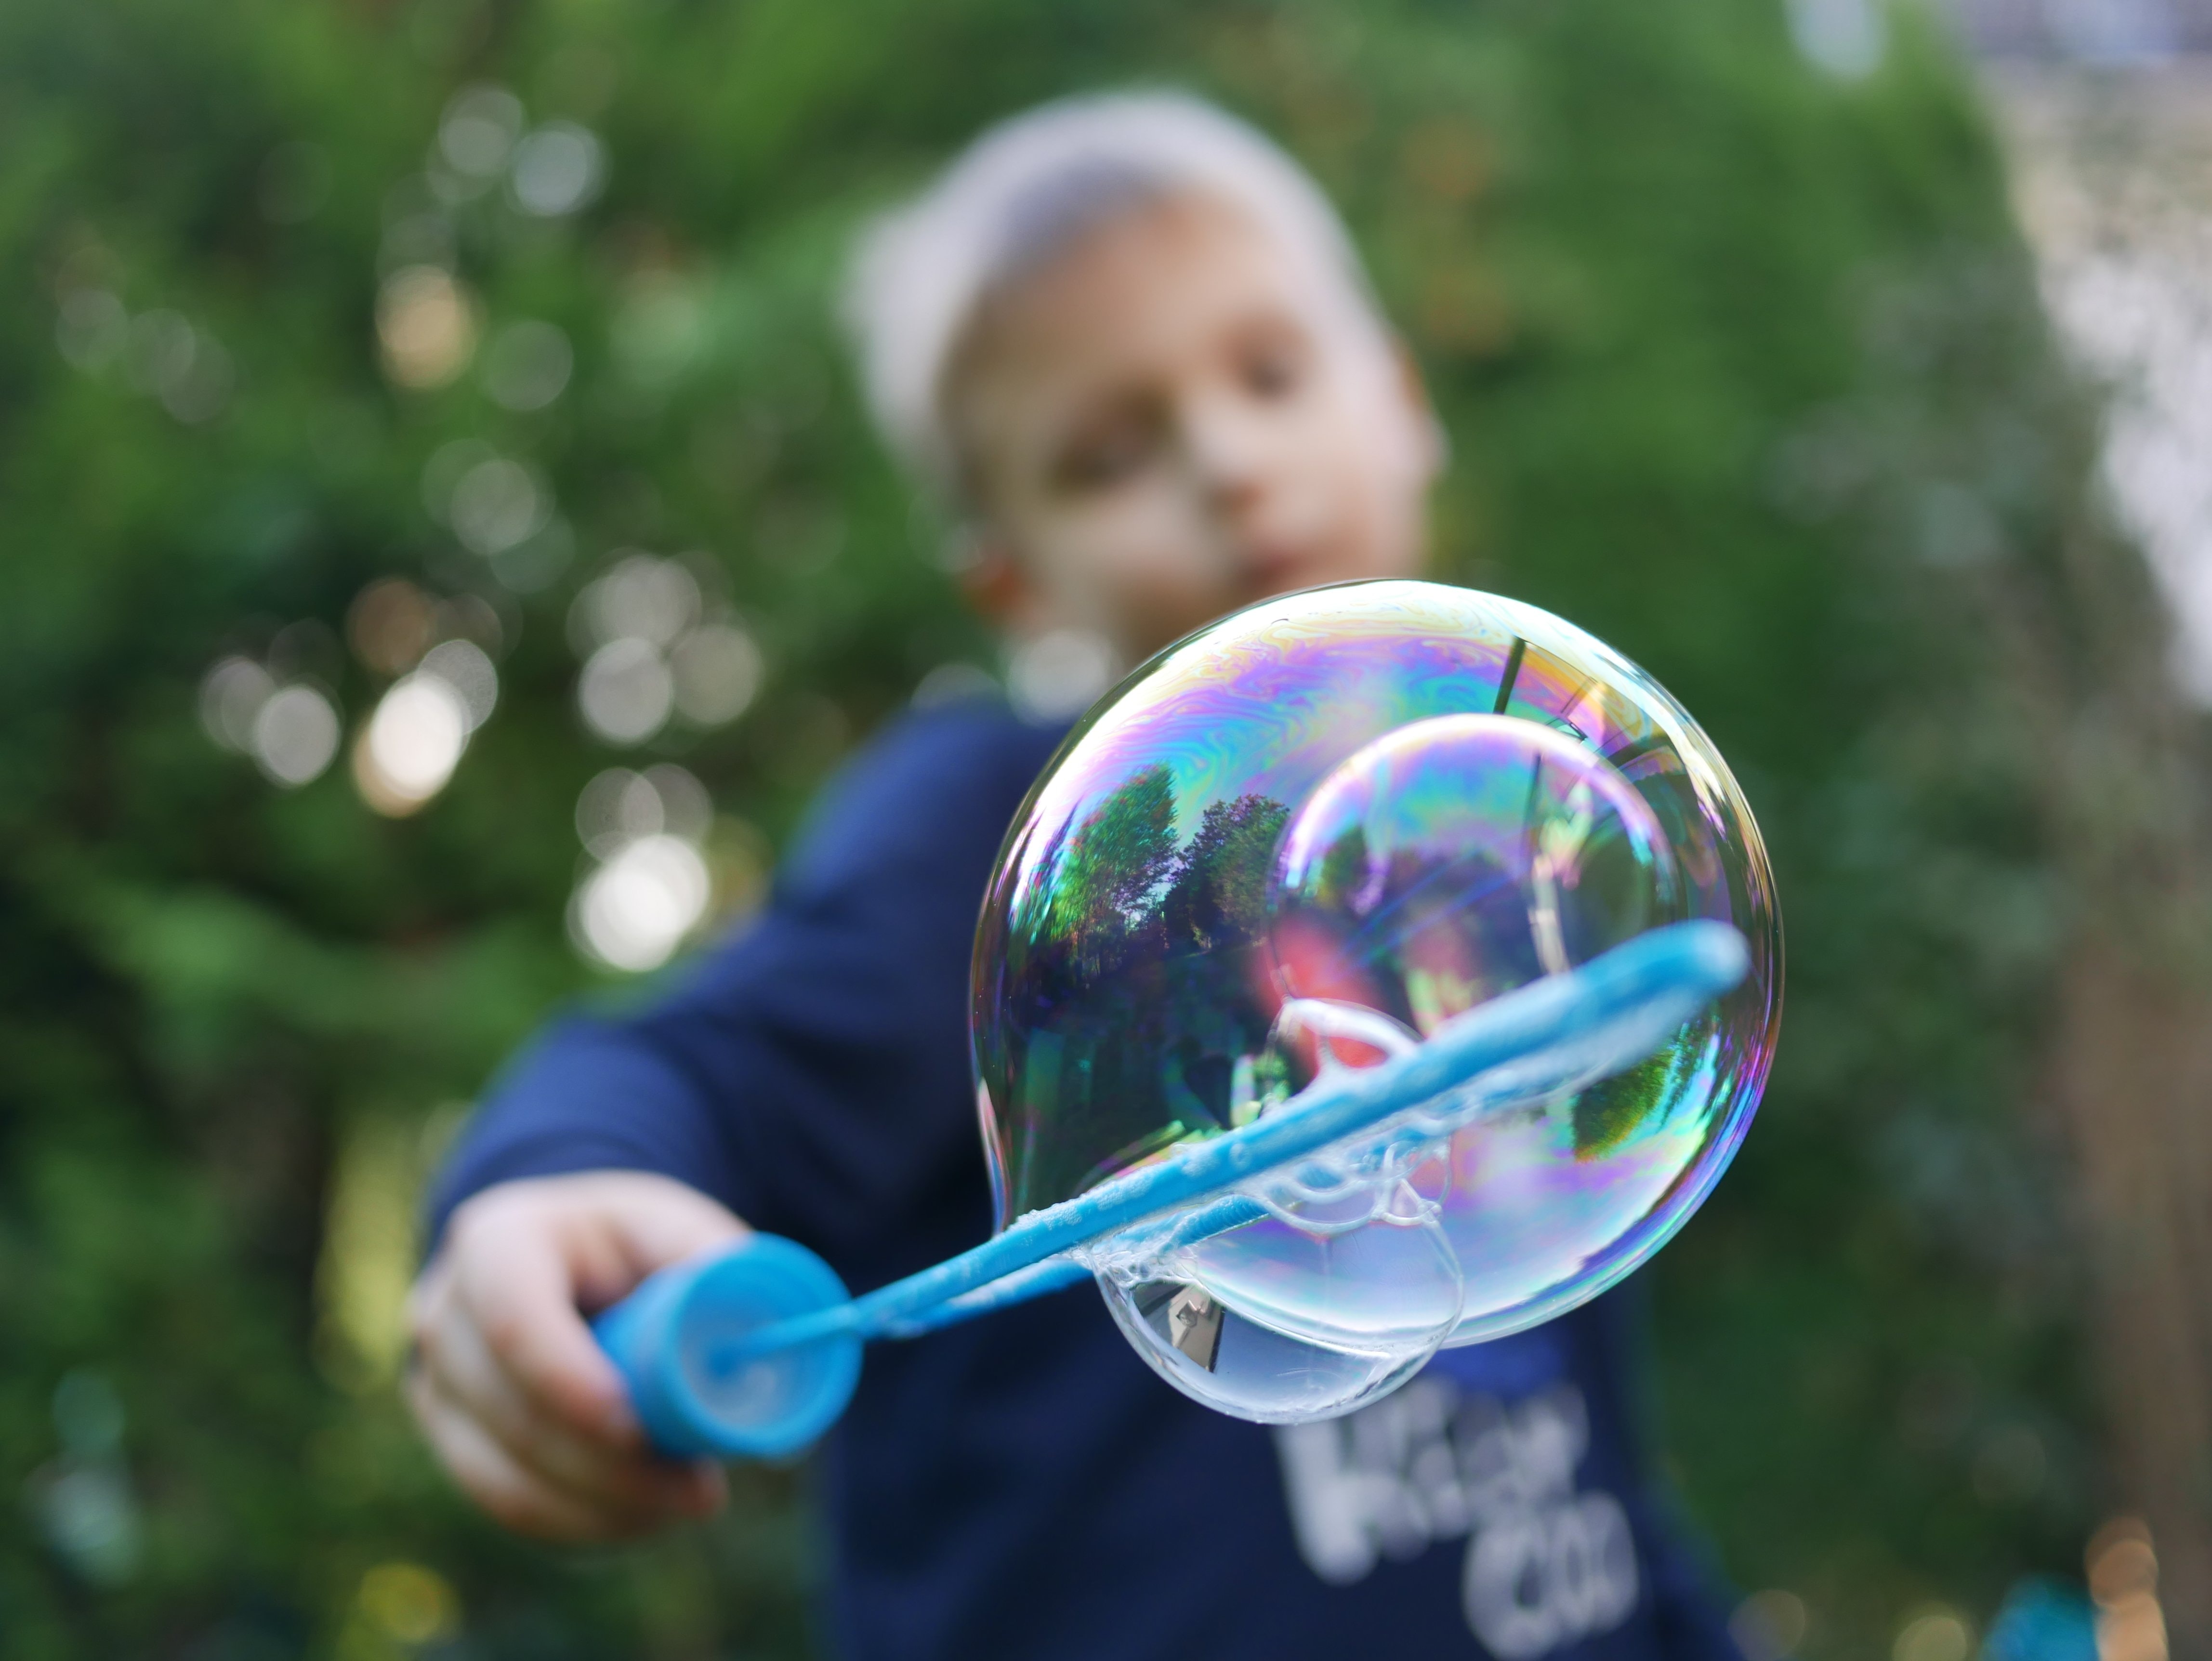 A child blowing soap bubbles helped change my life